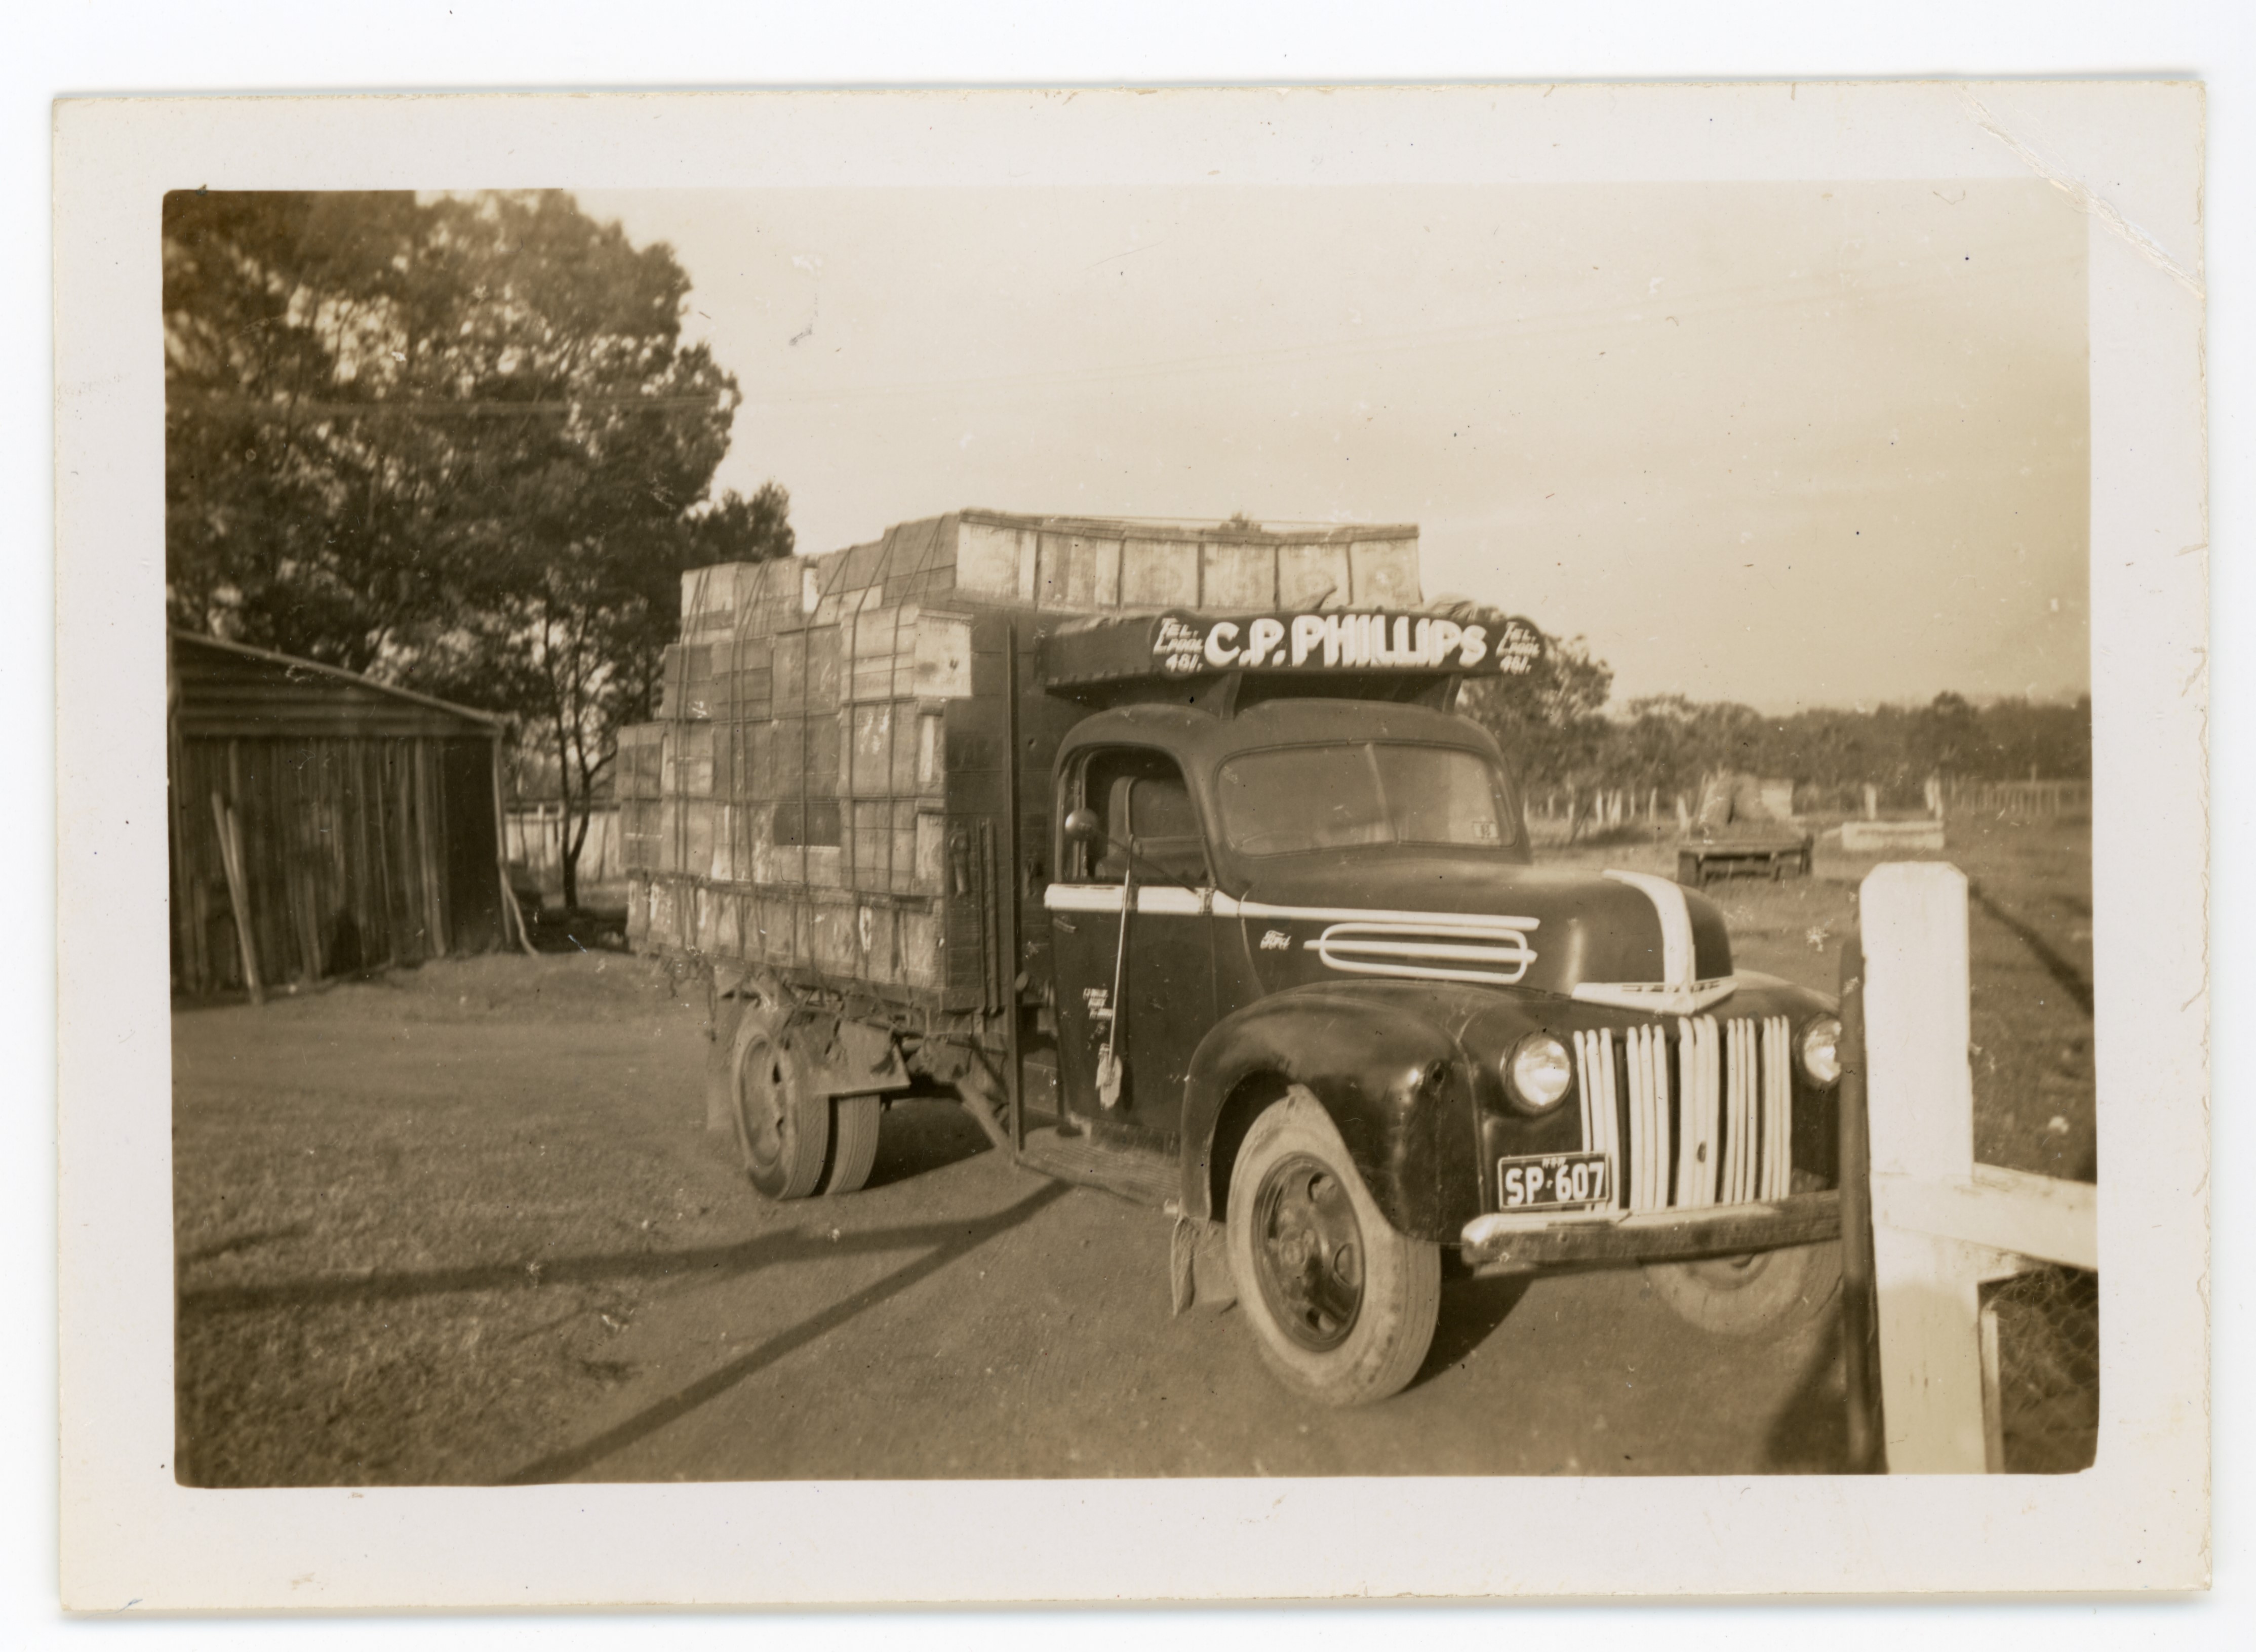 Clarence Phillips’s truck loaded up with egg-carrying boxes 